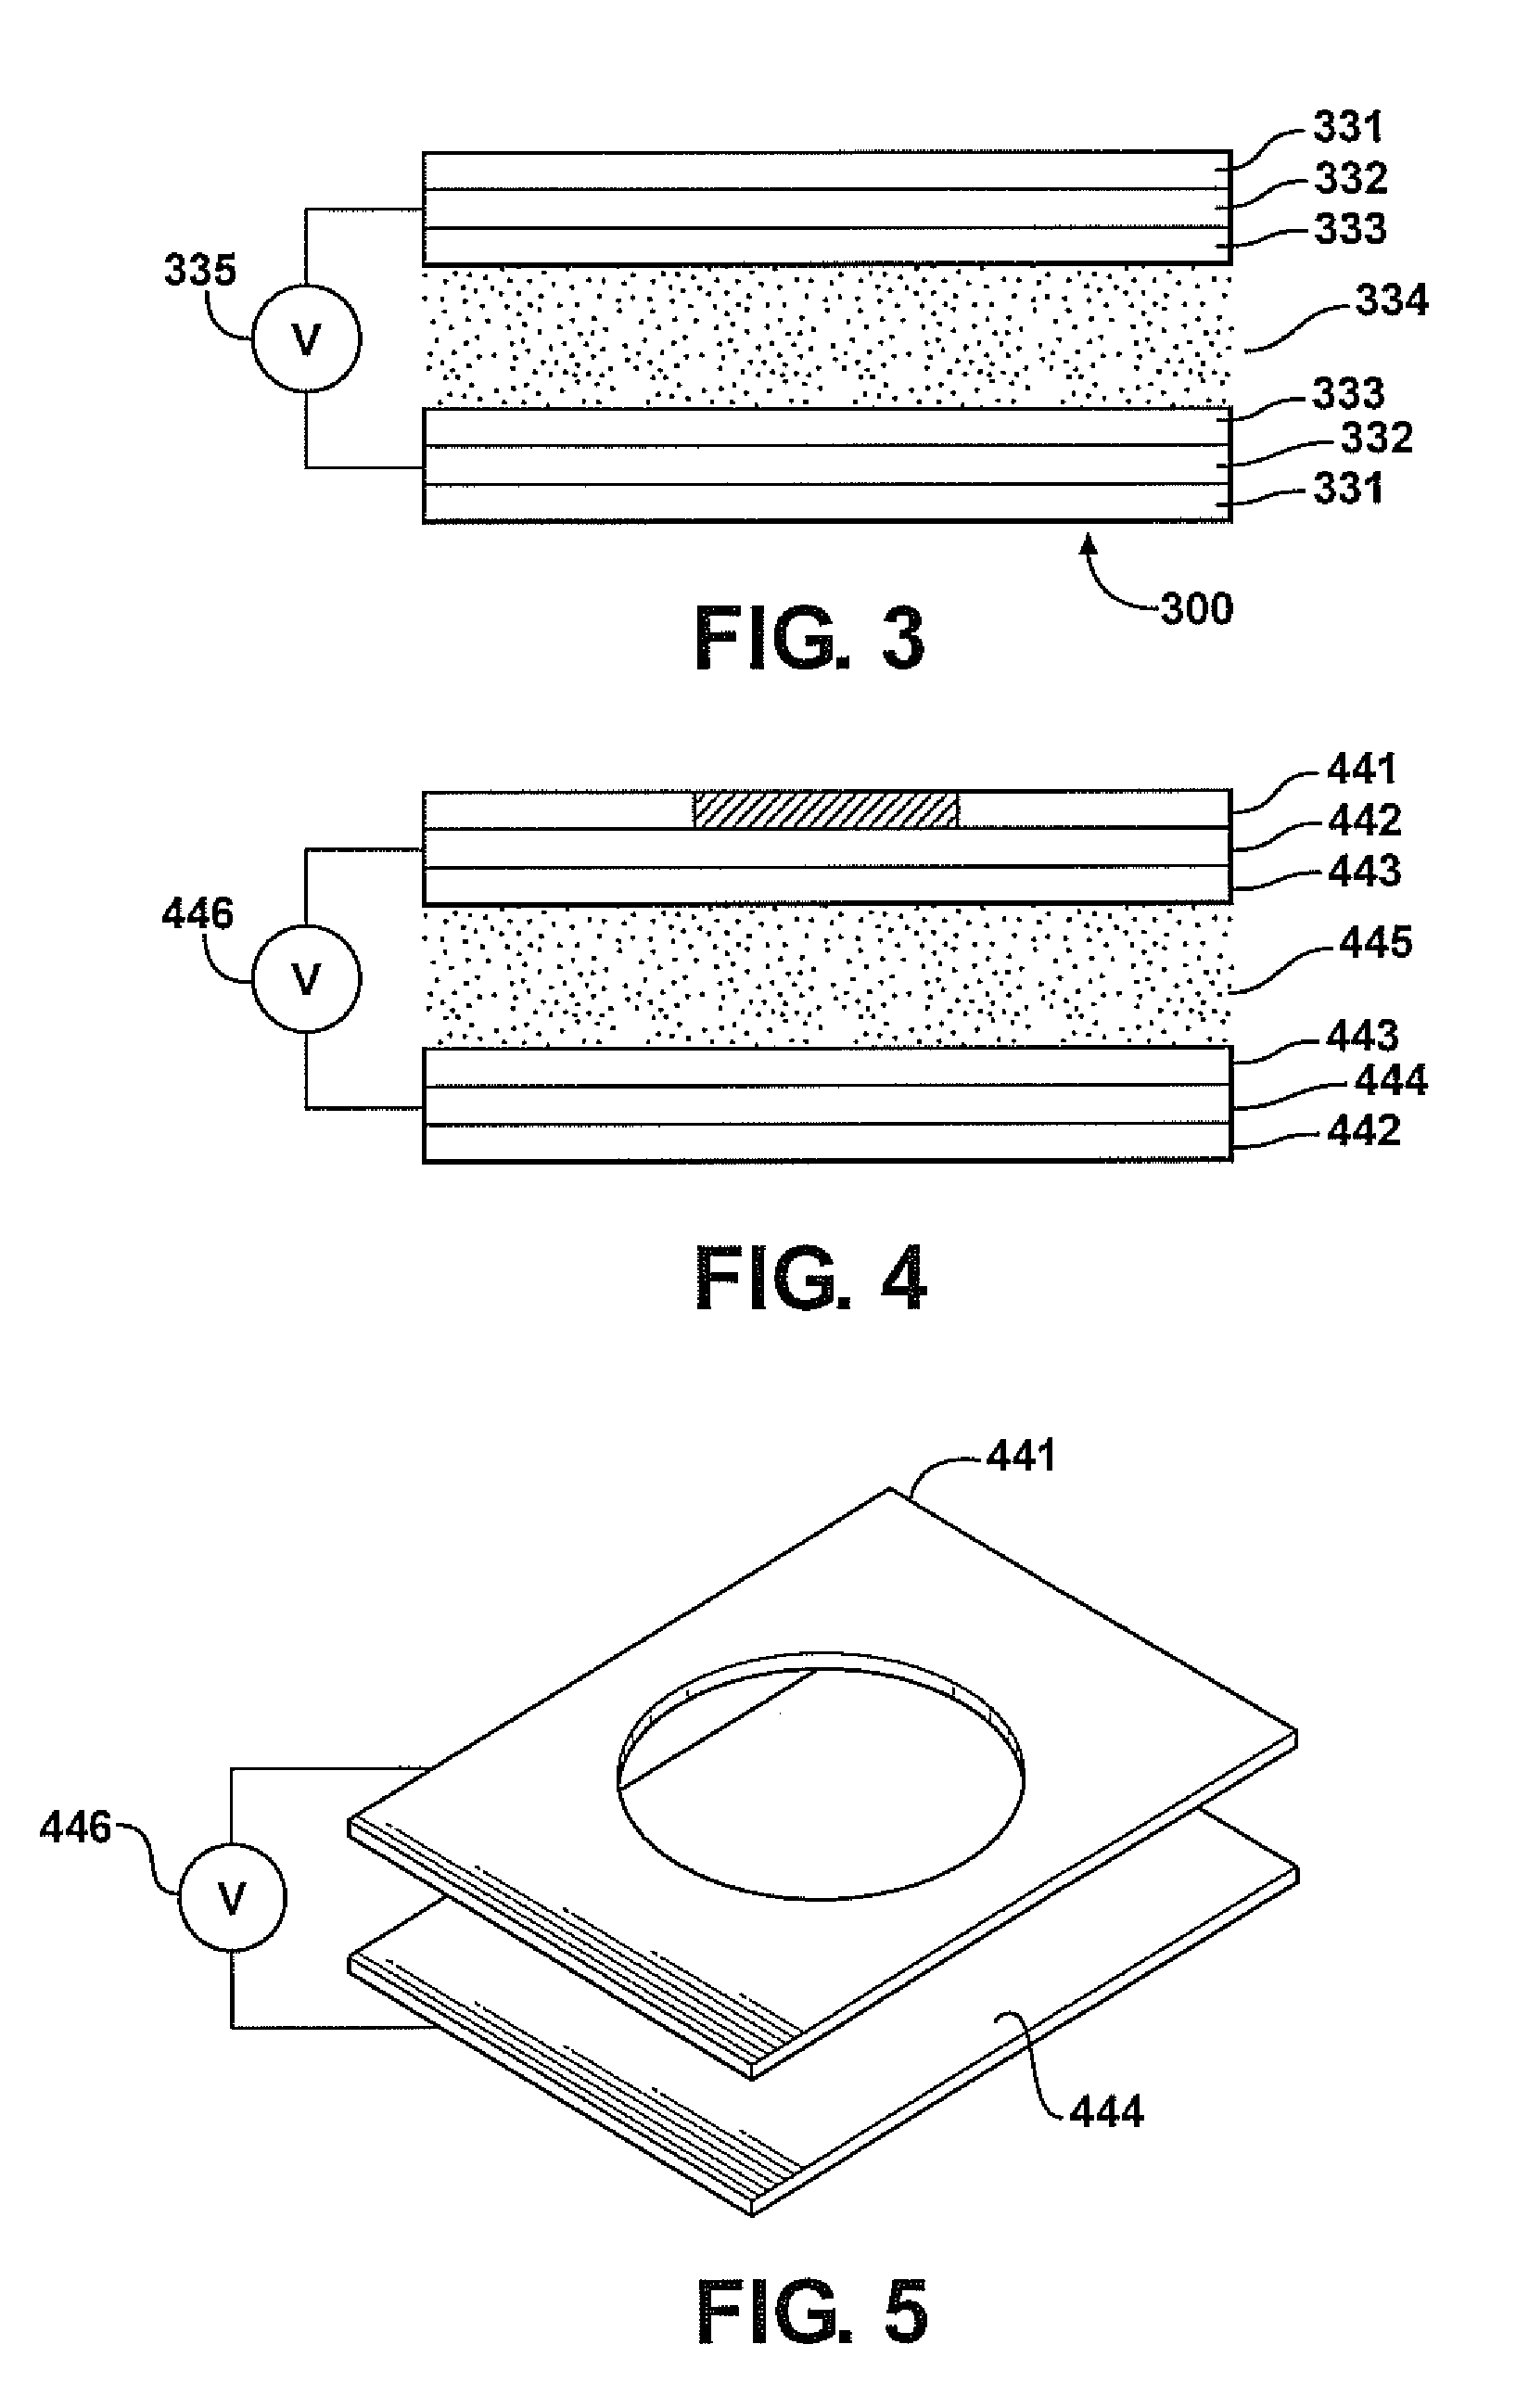 Pick-up head assembly for optical disc employing electrically tunable liquid crystal lens